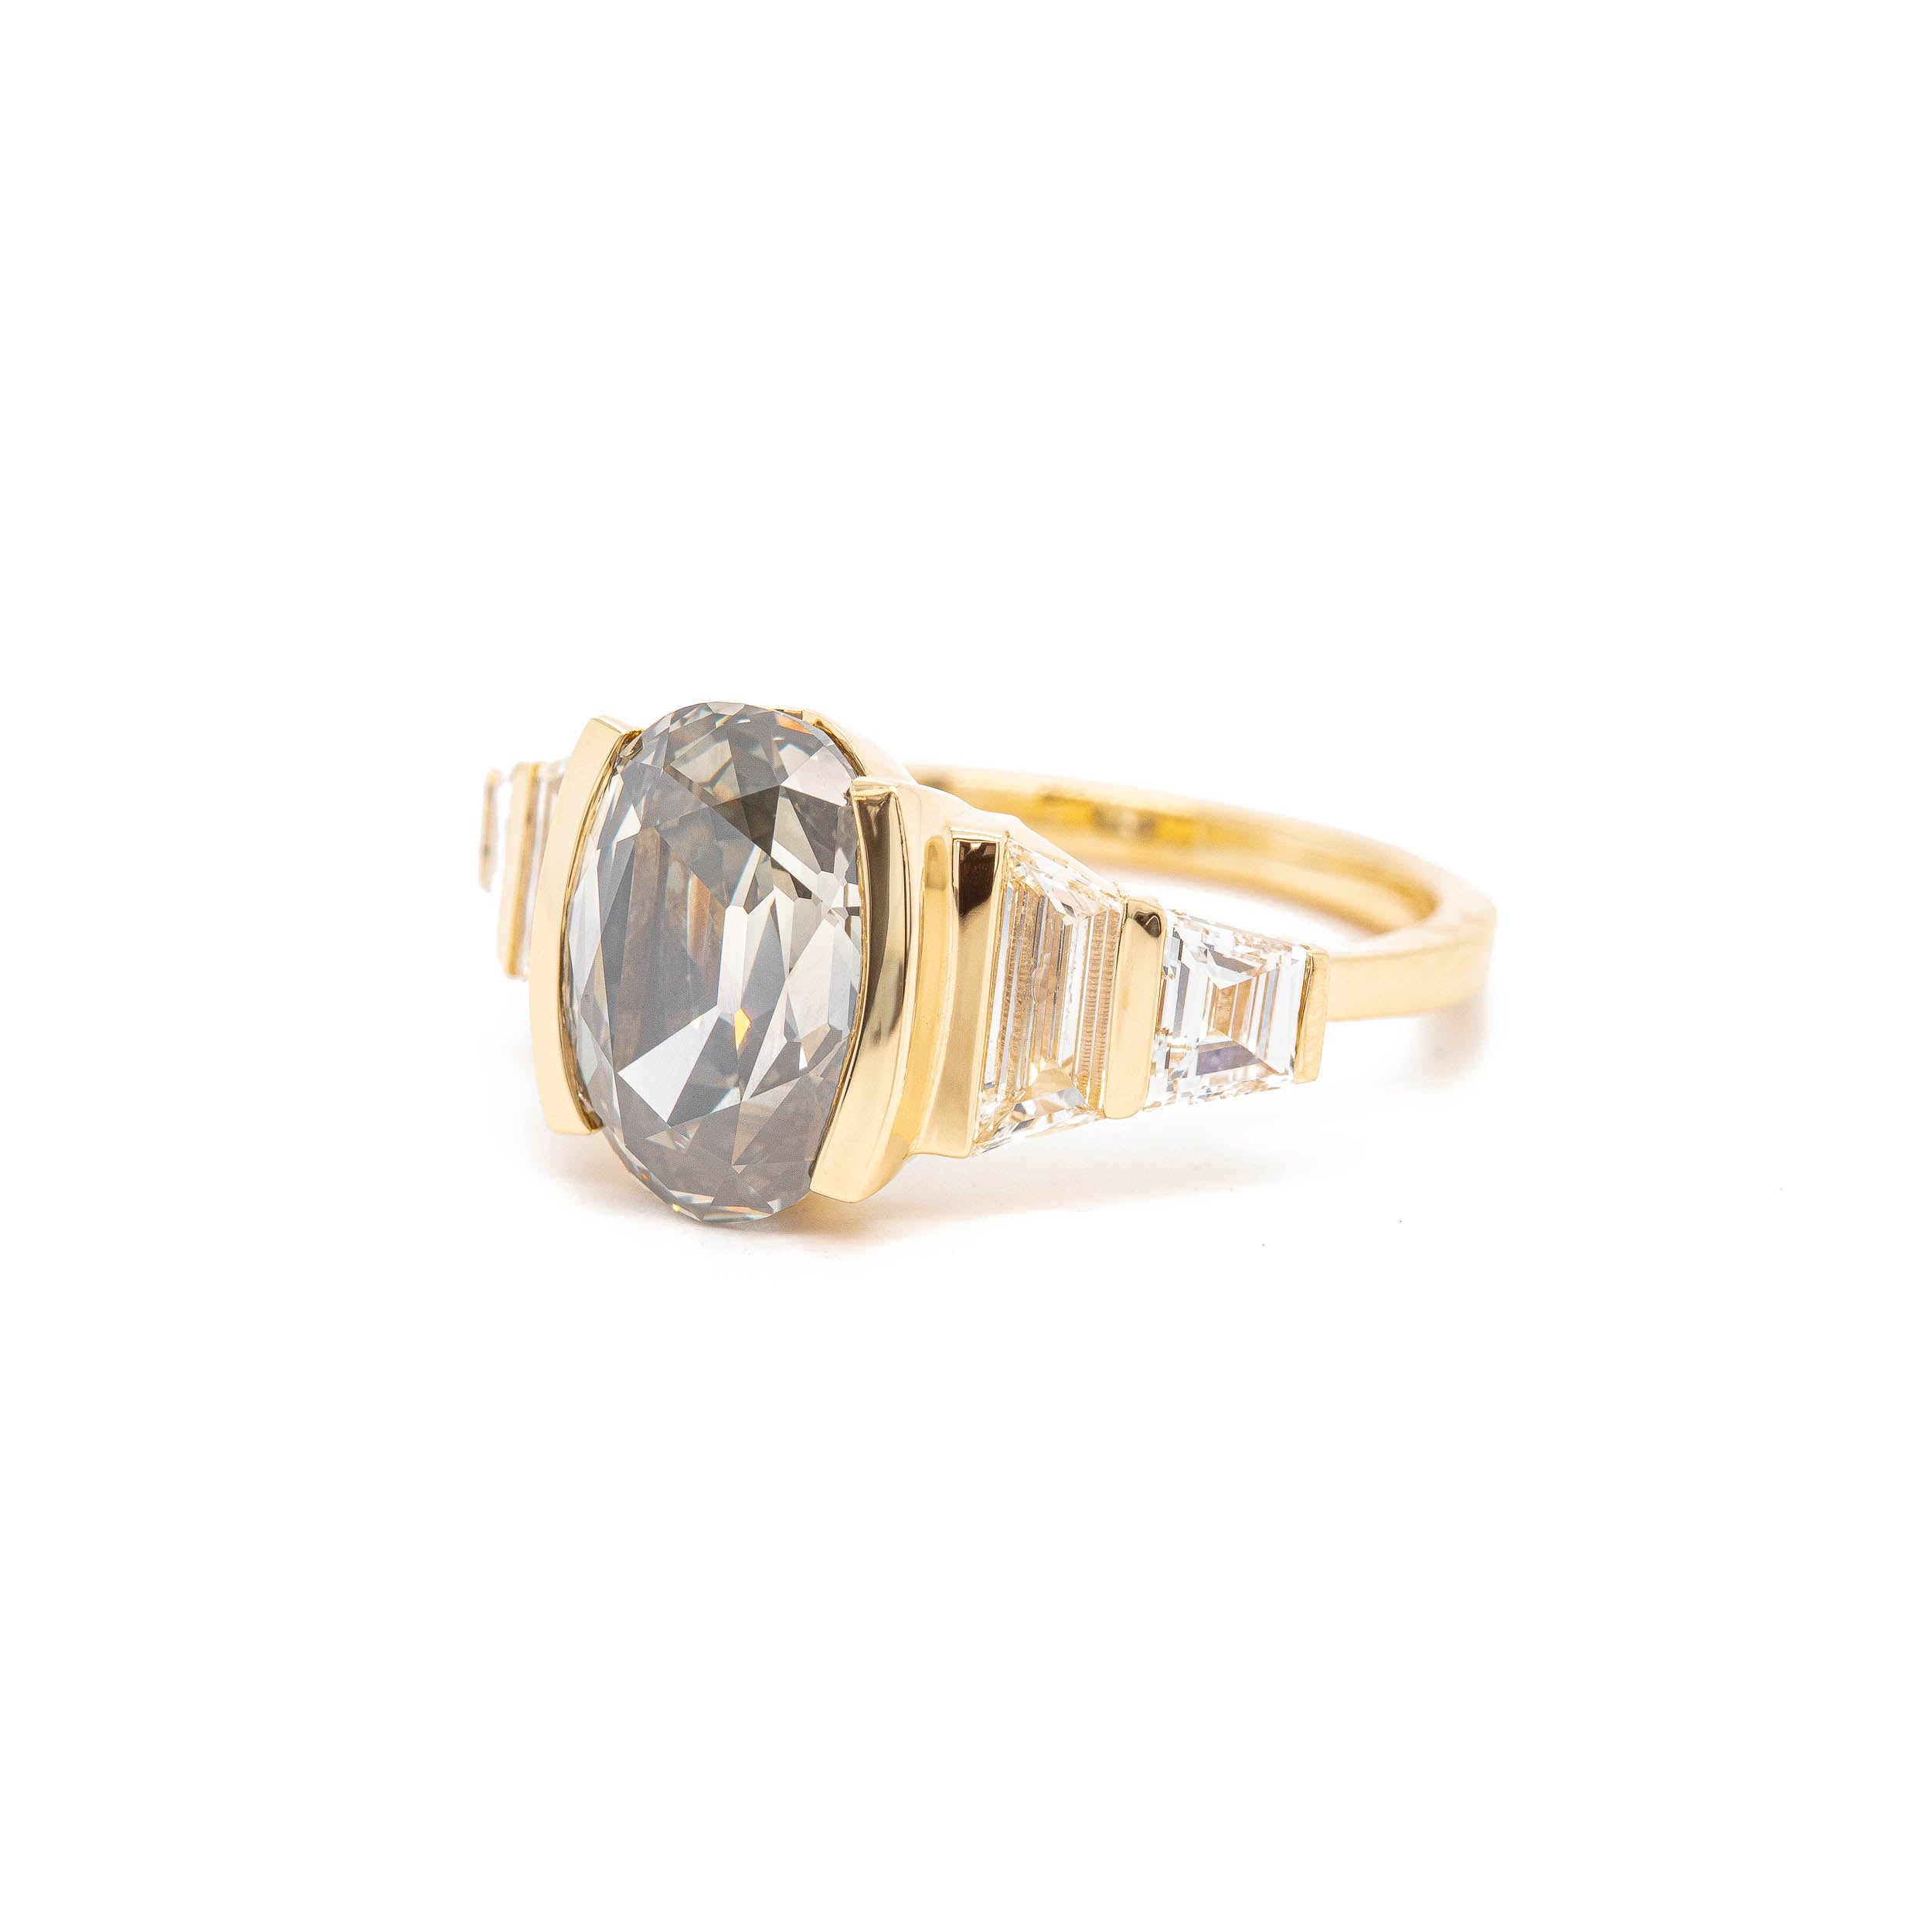 A yellow gold ring with The Phantom grey diamond and Rebecca Overmann baguette diamonds.